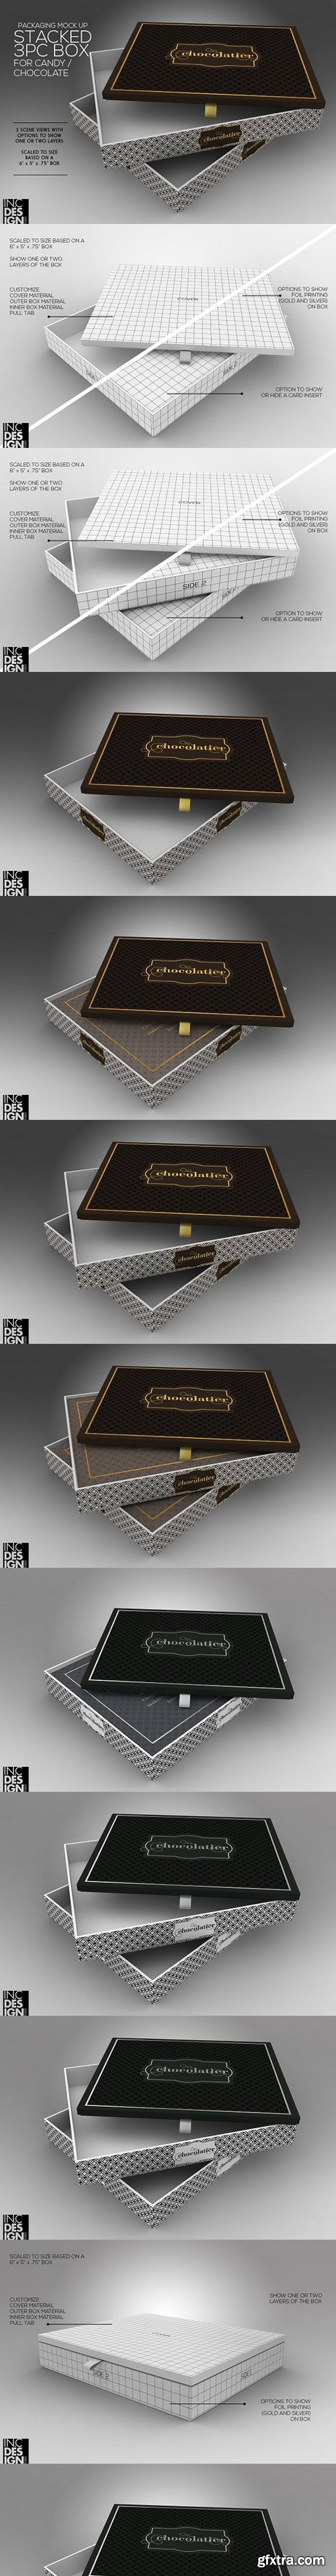 CM - Stacked 3pc Box Mock Up 1301408